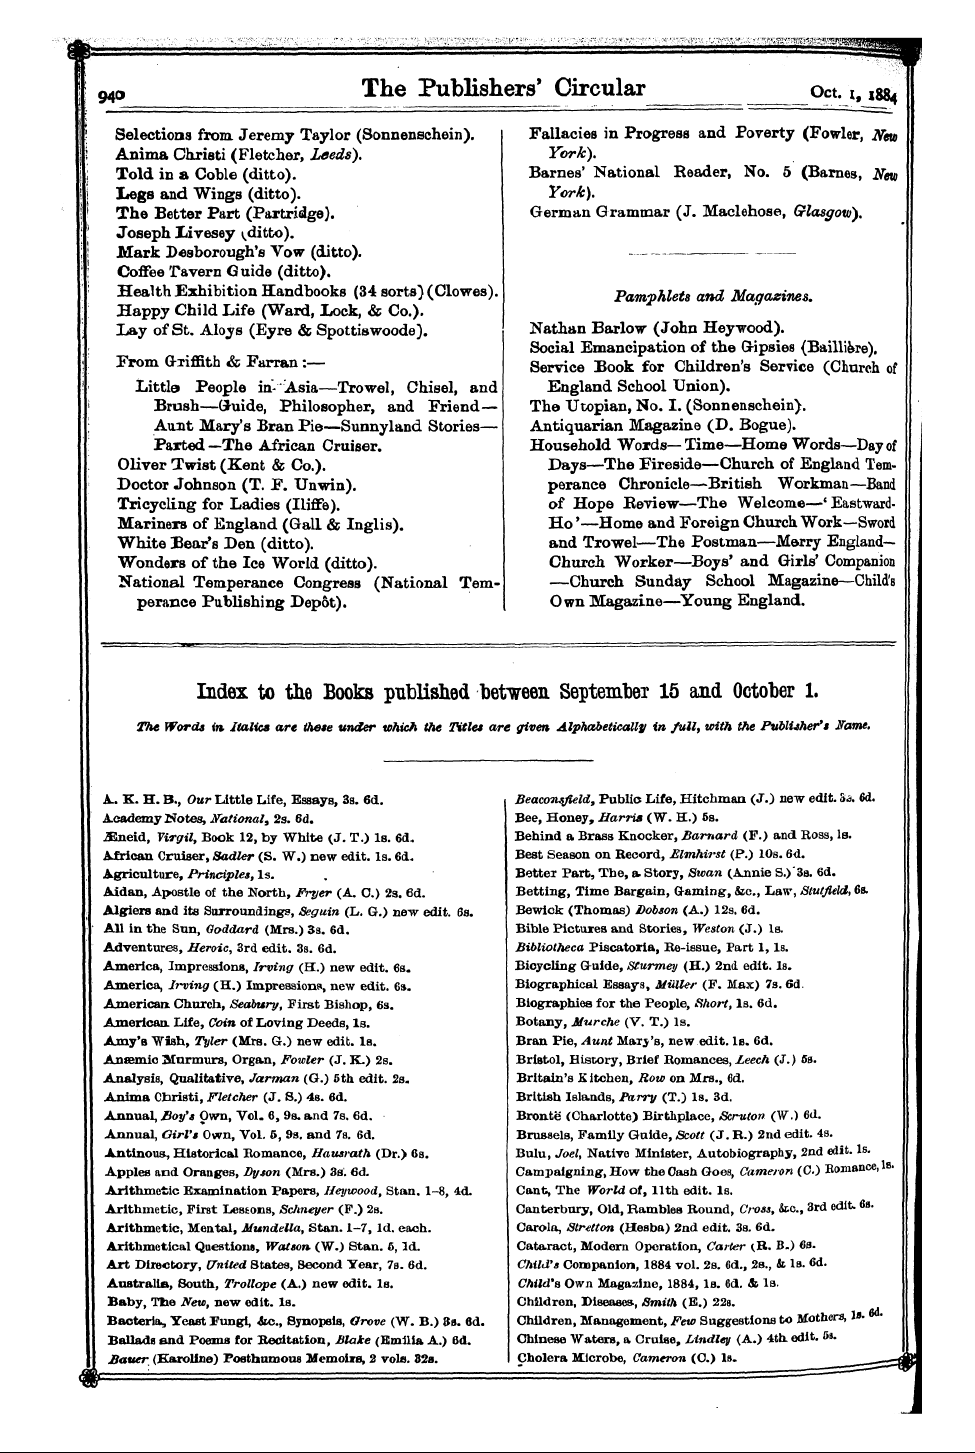 Publishers’ Circular (1880-1890): jS F Y, 1st edition - Index To The Books Published Between September 15 And October 1. The Words In Italics Are These Under Which The Titles Are Given Alphabetically In Fully With The Publisher's Fame.